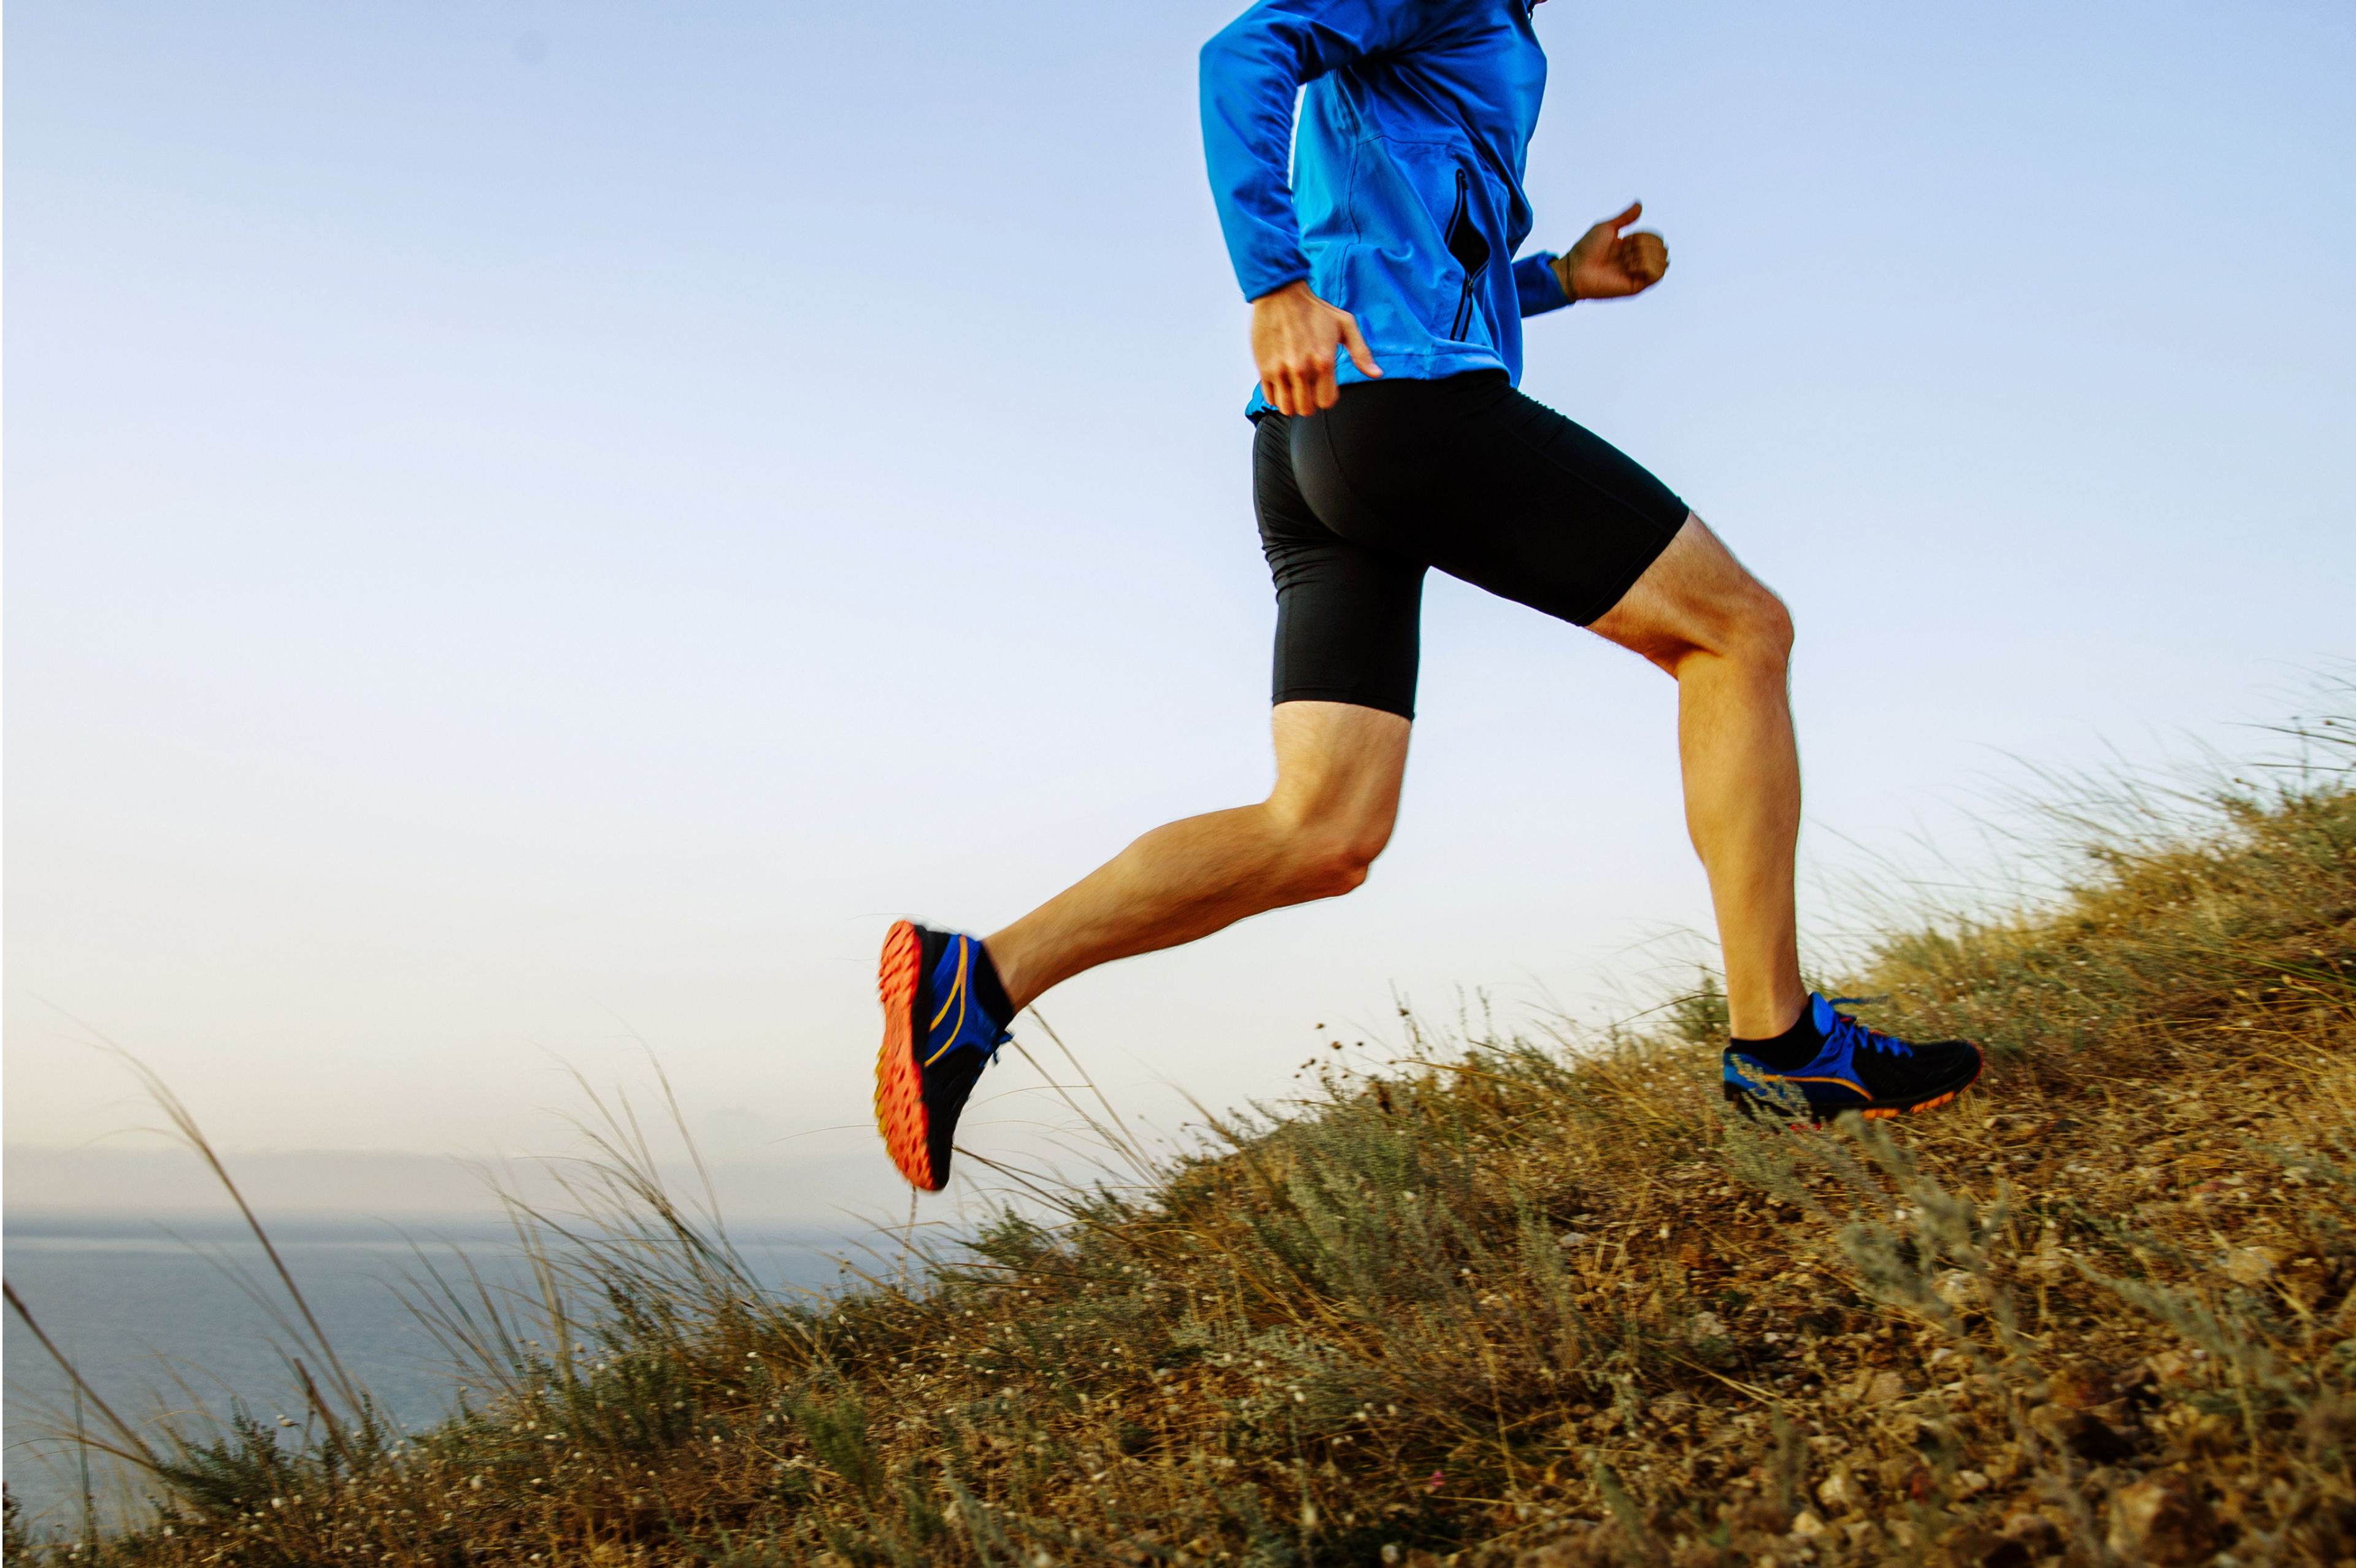 Increasing your running distance or intensity too quickly can lead to plantar fasciitis.